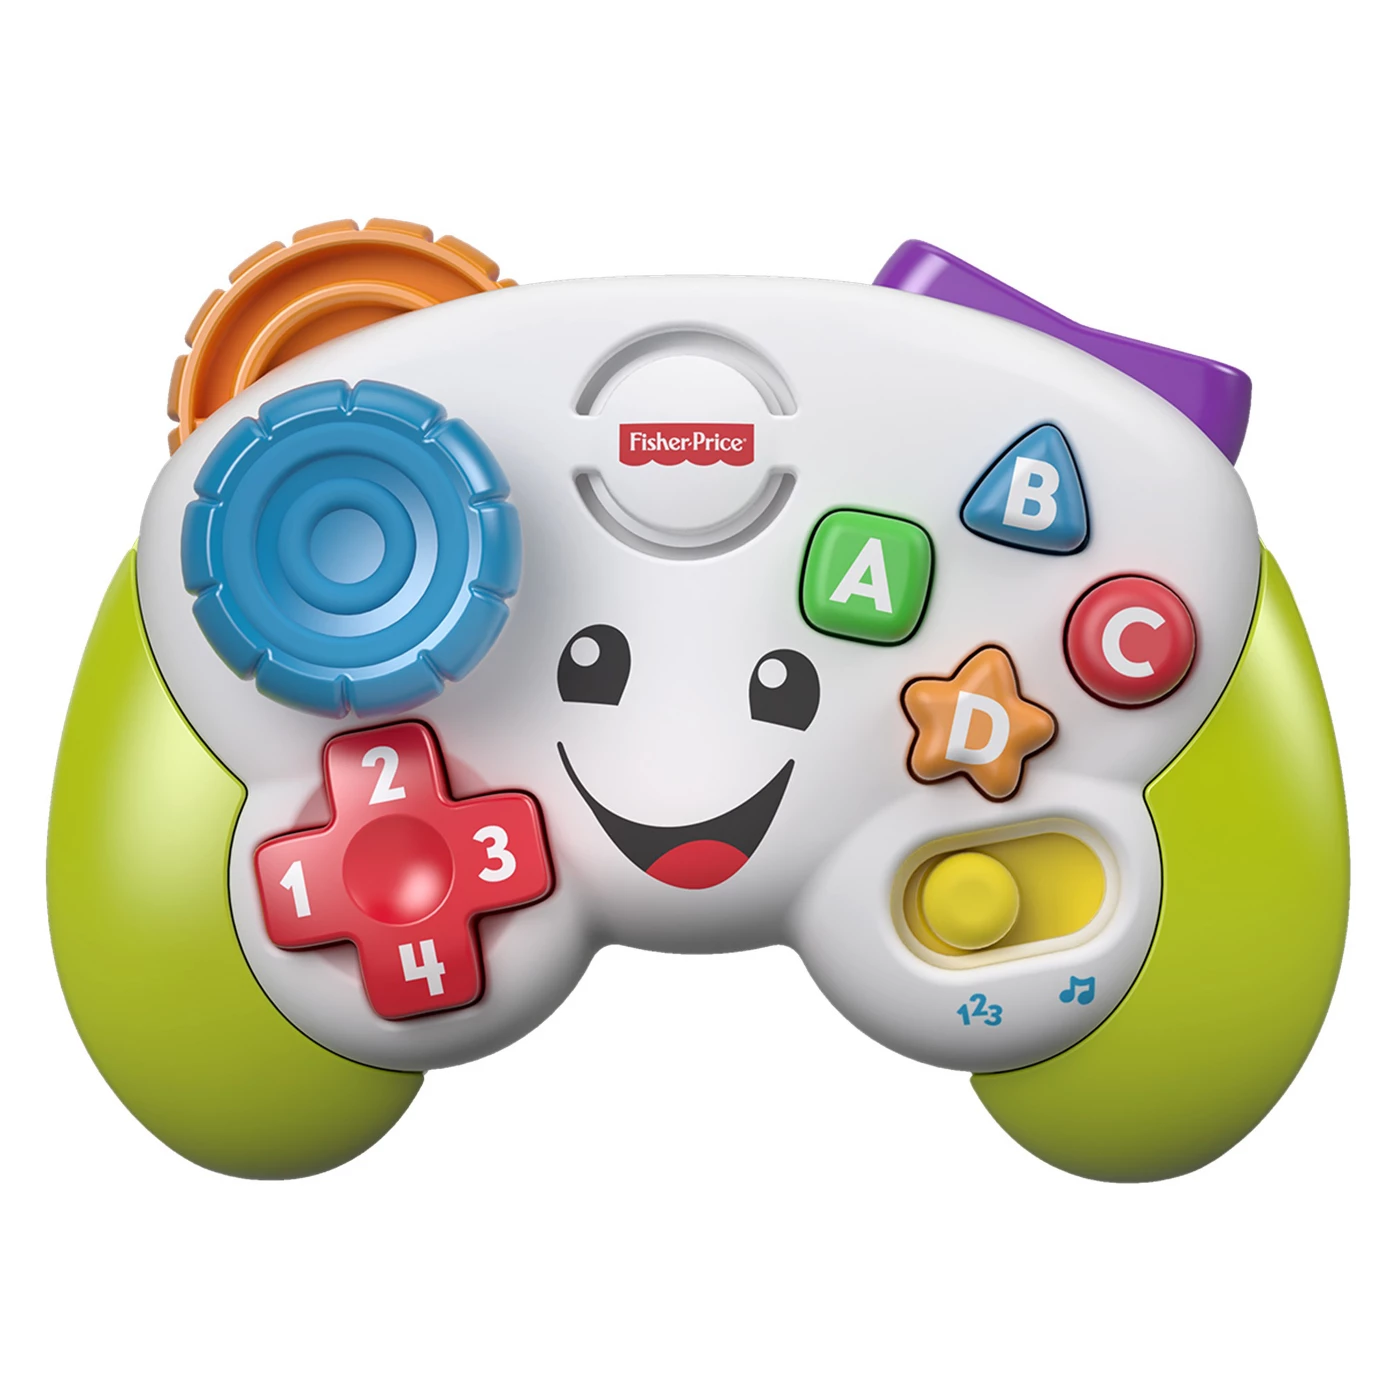 Fisher-Price Laugh and Learn Game and Learn Controller - image 1 of 10